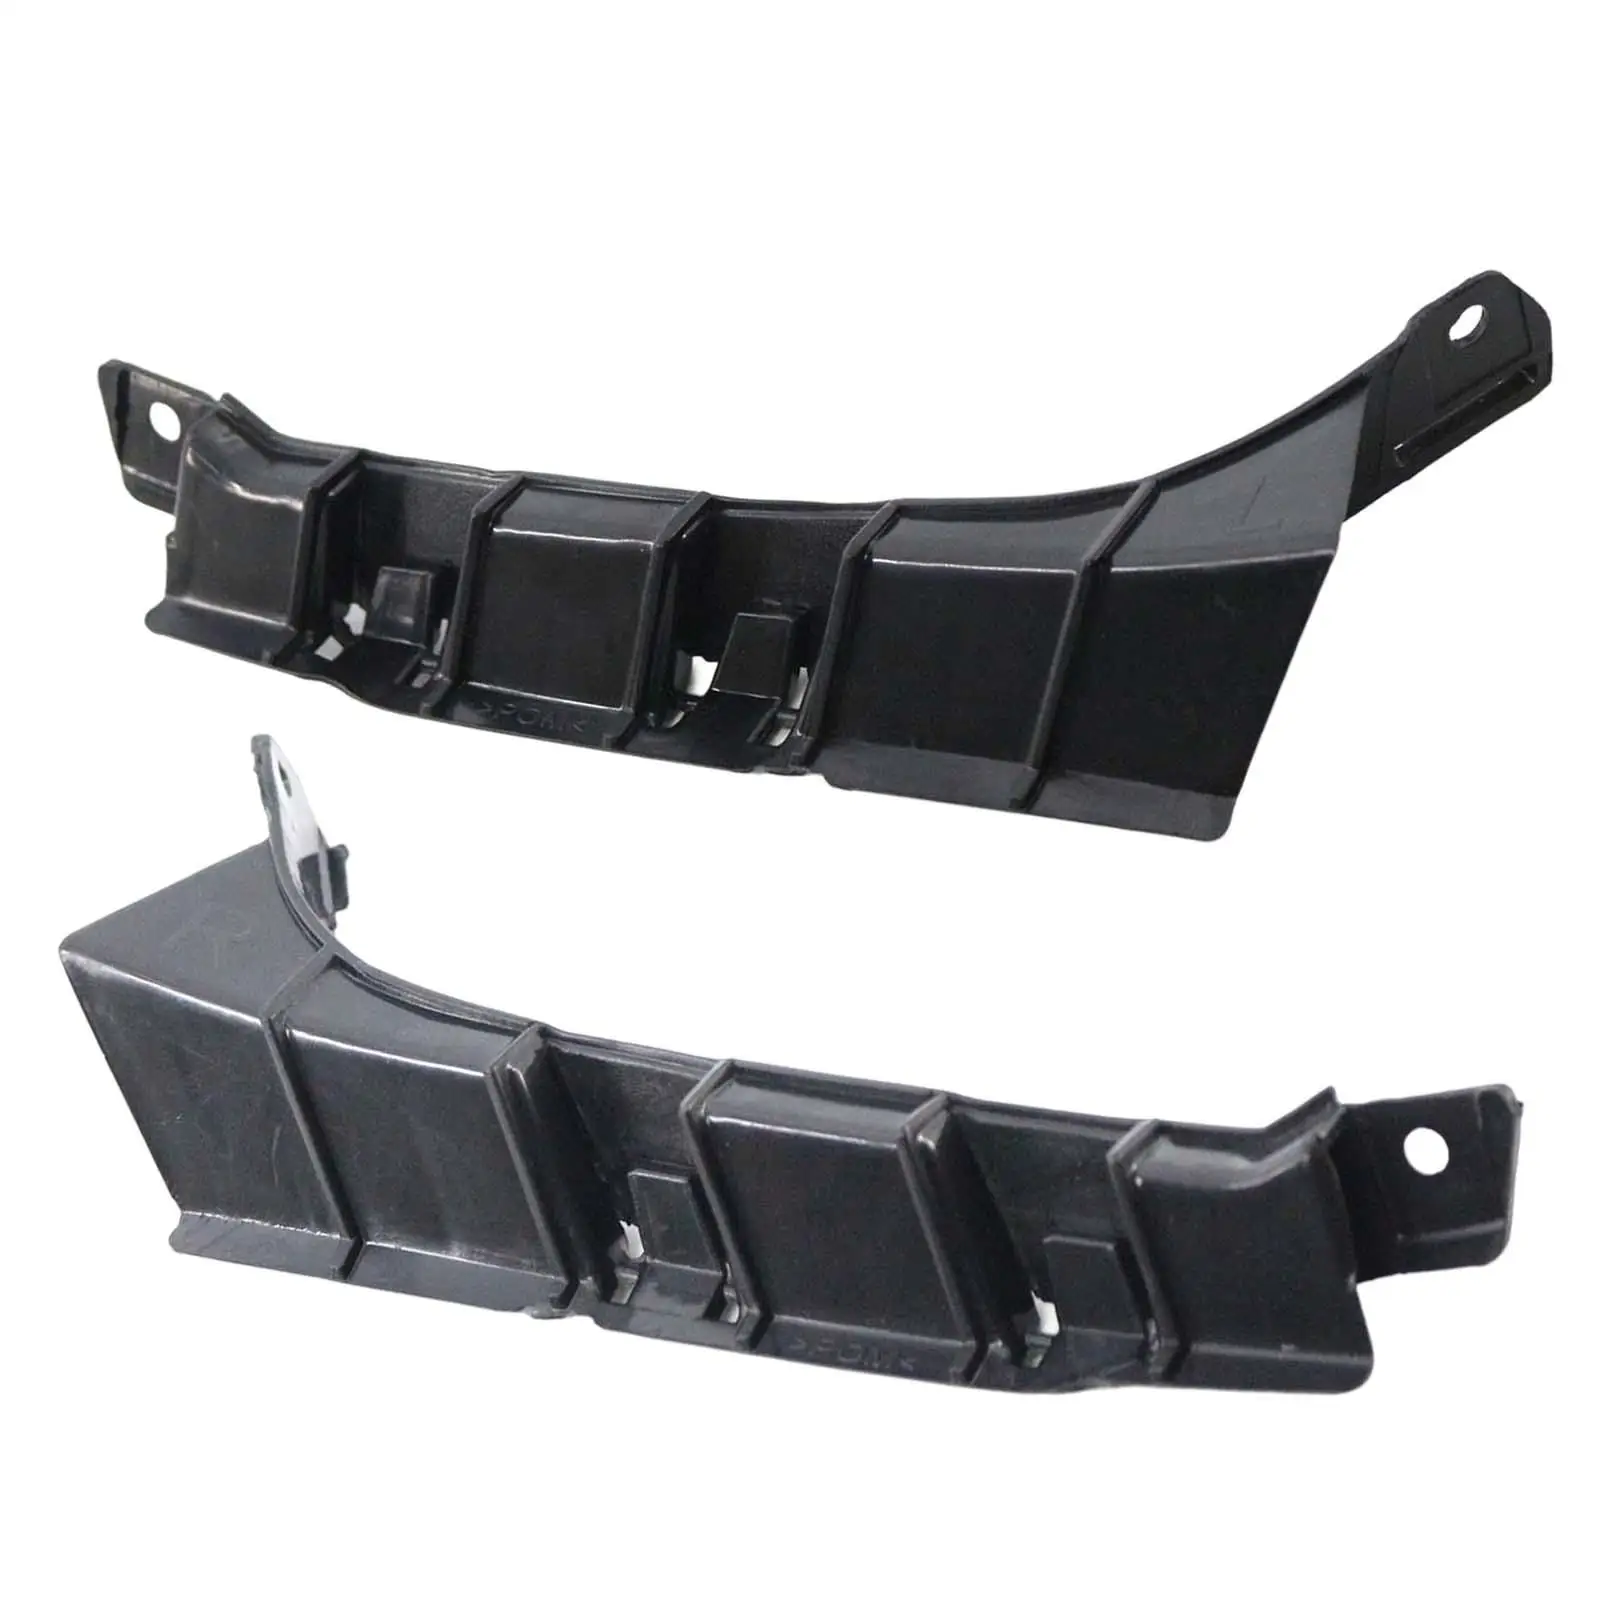 Car Front Bumper Bracket Holder Cover, Durable, Fit for x5 E53, Parts Replace Easy to Install